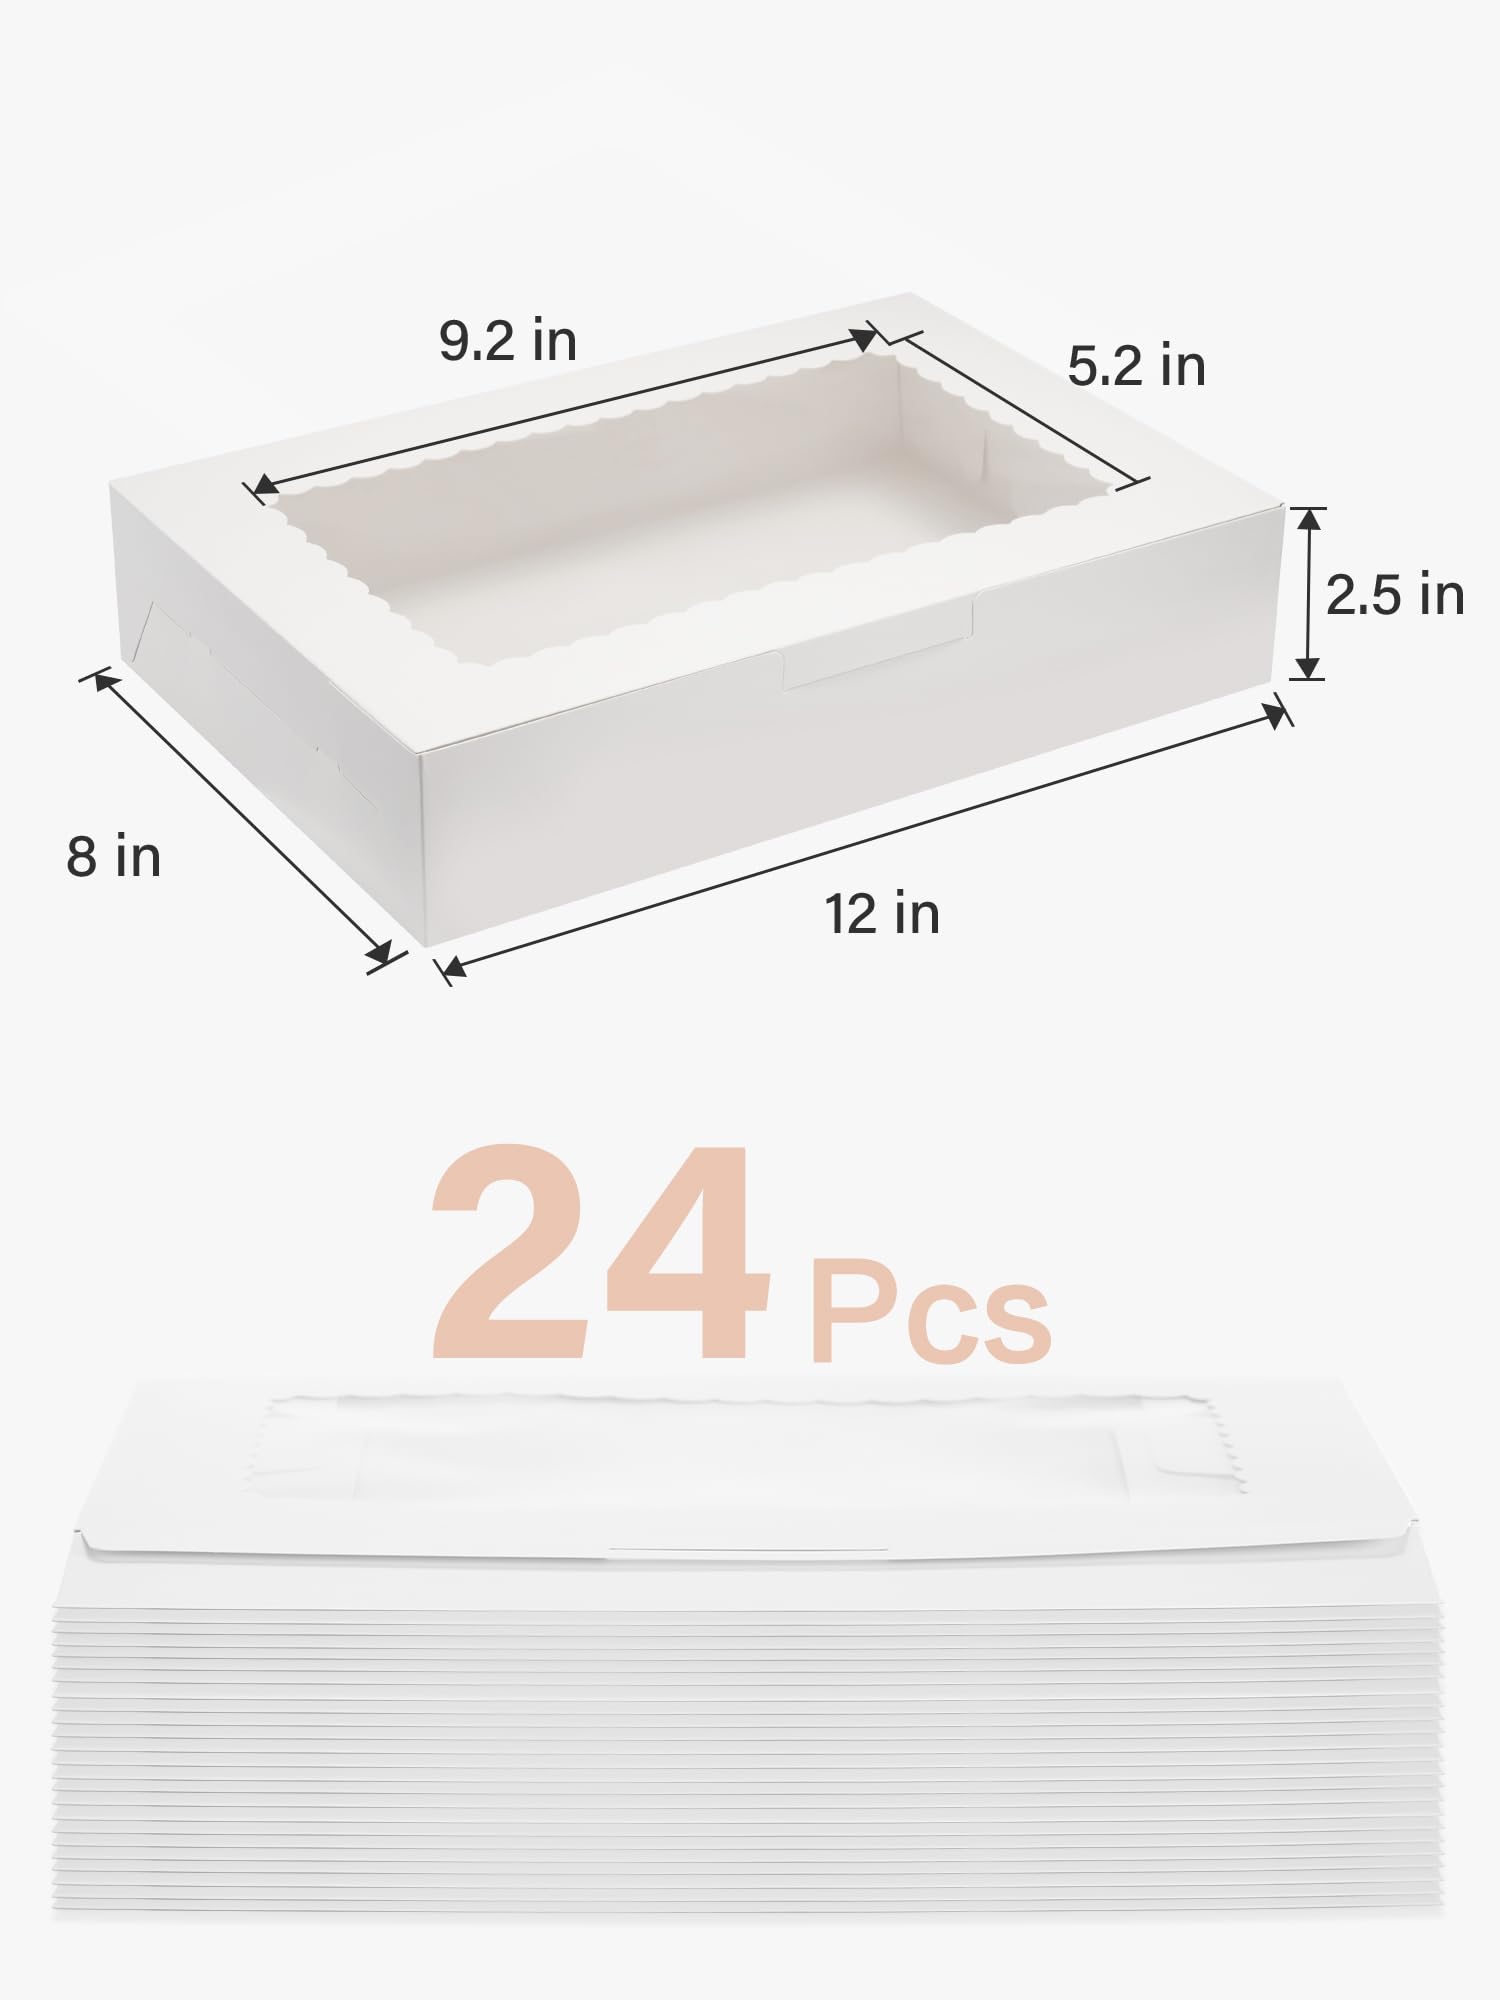 Kootek 12 Inch Bakery/Treat Boxes with Window, 24pcs 12x8x2.5 Inches White Cookie Boxes Pastry Boxes for Desserts, Cupcakes, Pies, Donuts, Chocolates, Cake Decorating Supplies